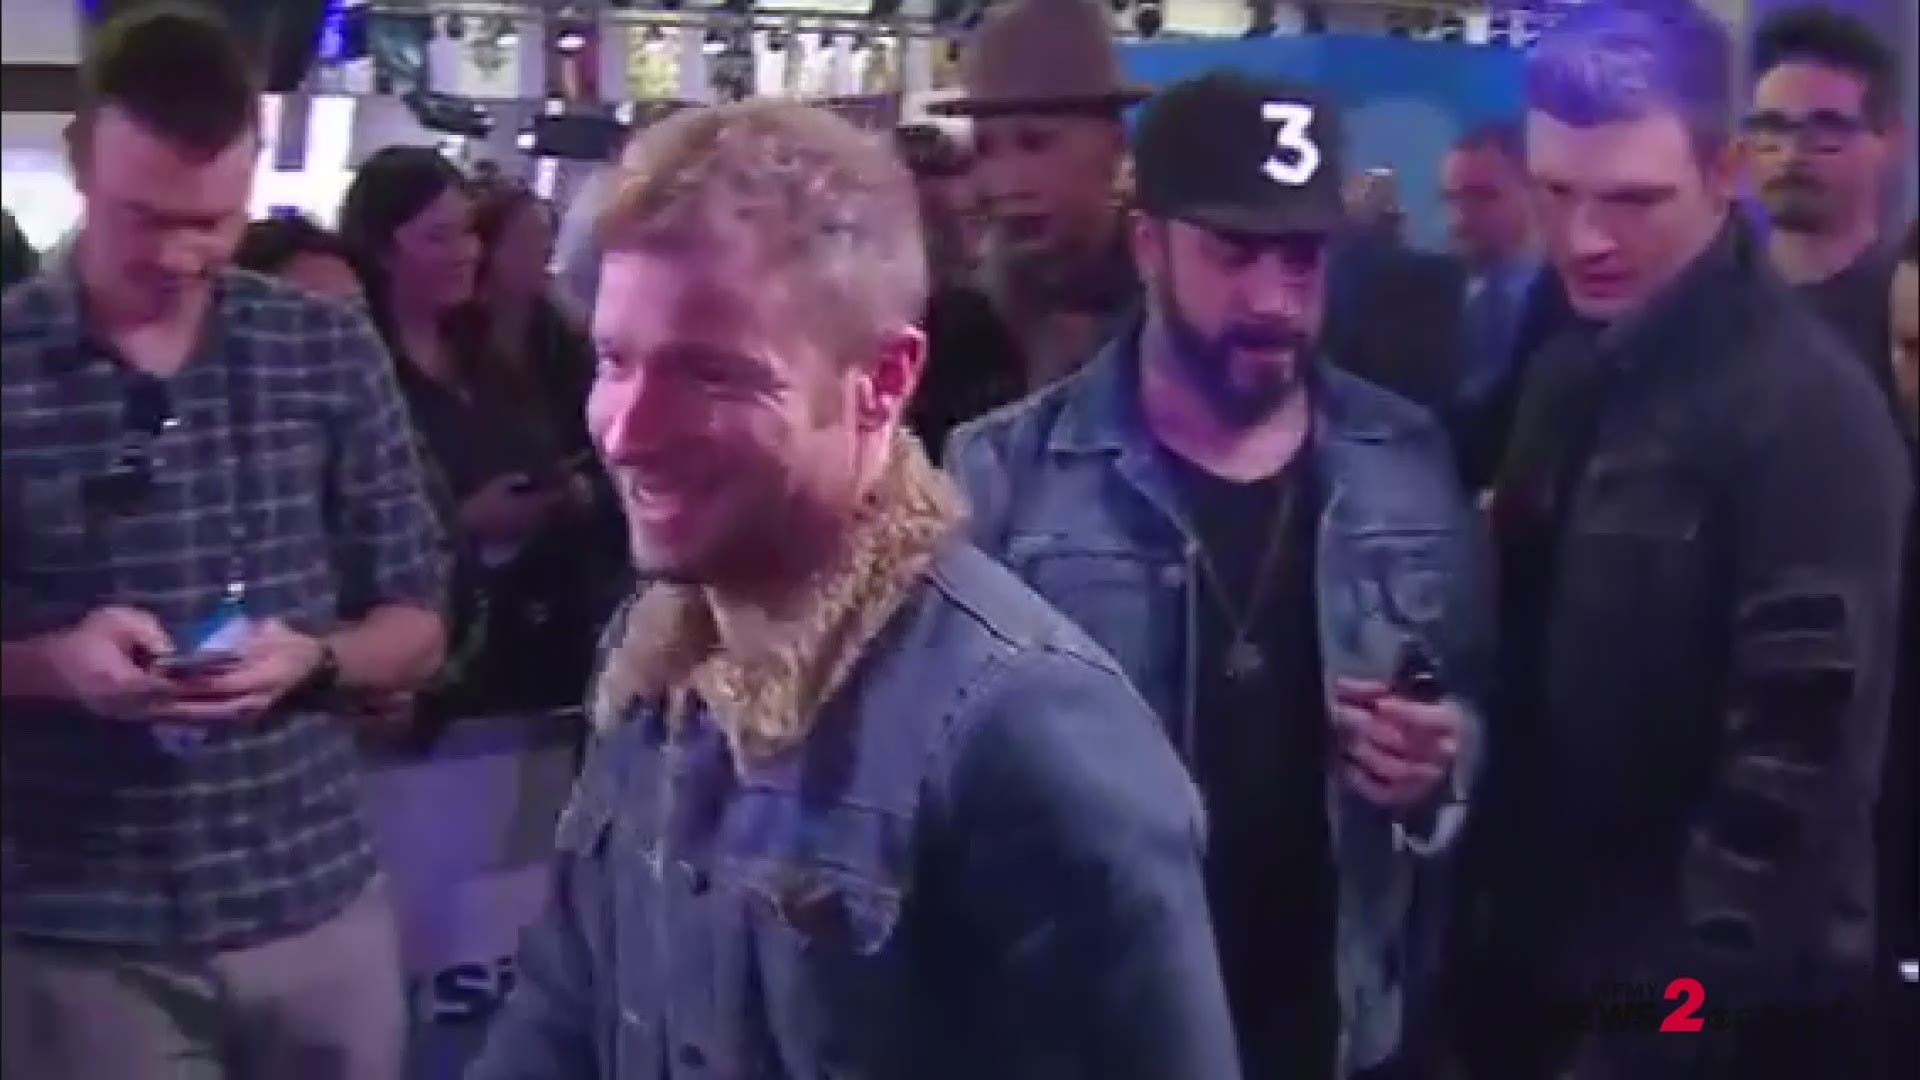 We spotted the Backstreet Boys at Mercedes-Benz Stadium ahead of Super Bowl 53! We even got them to sing!